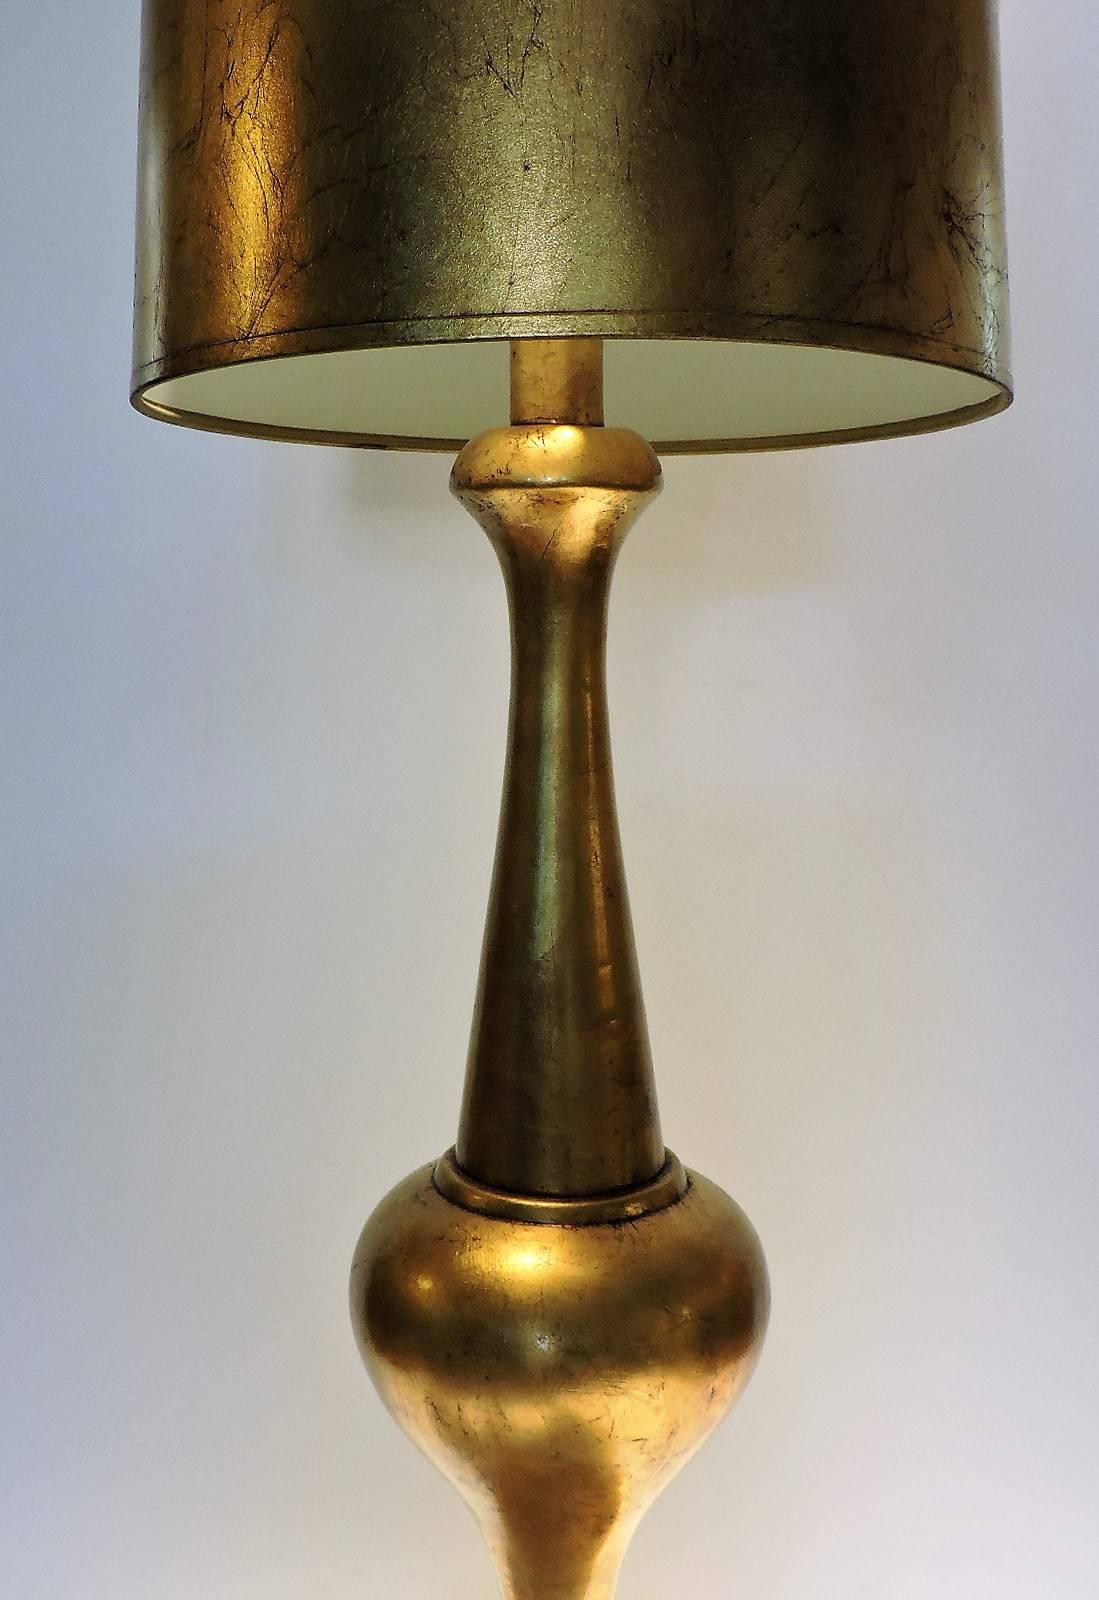 Hollywood Regency brilliantly gilded table lamp with beautifully proportioned sleek statuesque form. Retains great original tall tapered textured marbleized gilt shade. Great quality. In the style of The Marbro Lamp Company, circa 1960s.